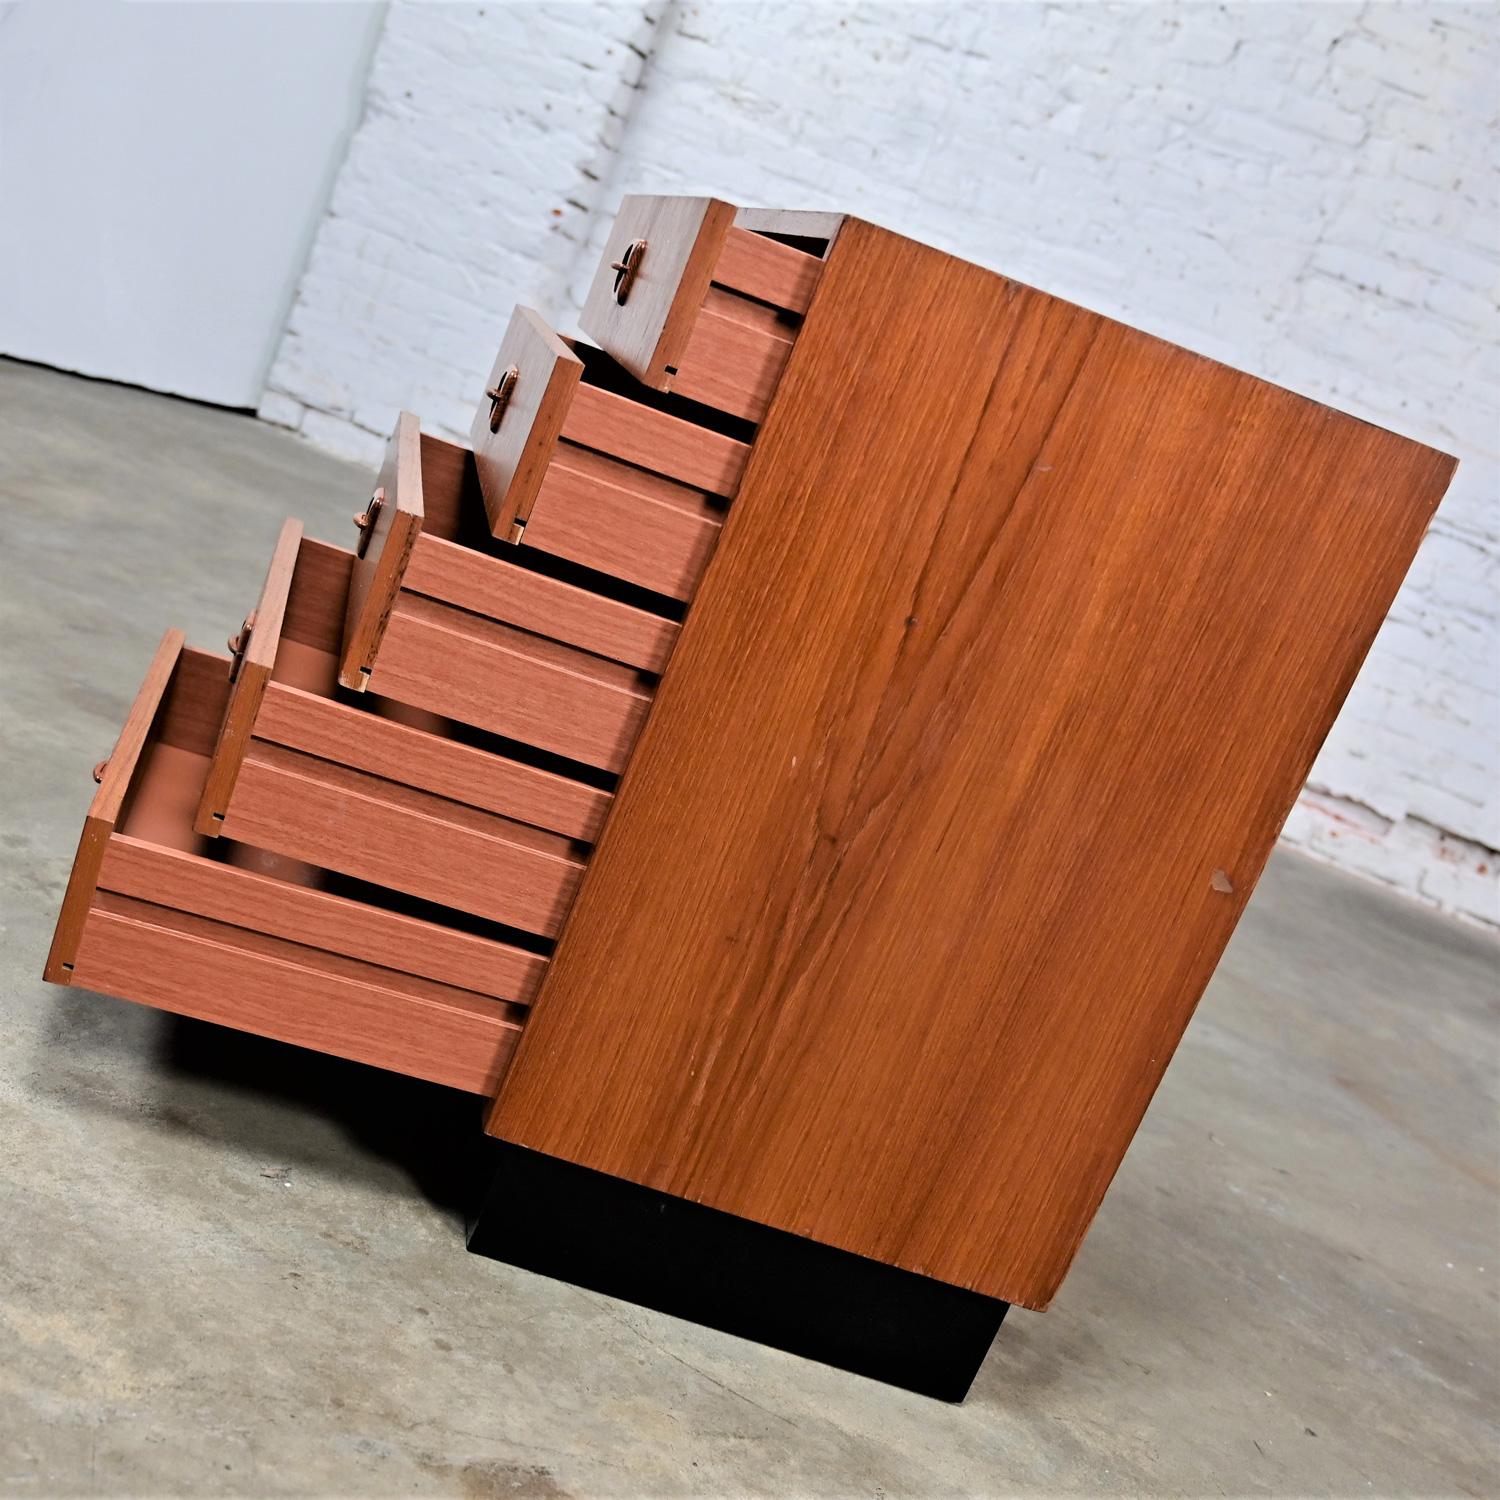 Wood Mid to Late 20th Century Scandinavian Modern Small Teak Cabinet 5 Drawers  For Sale